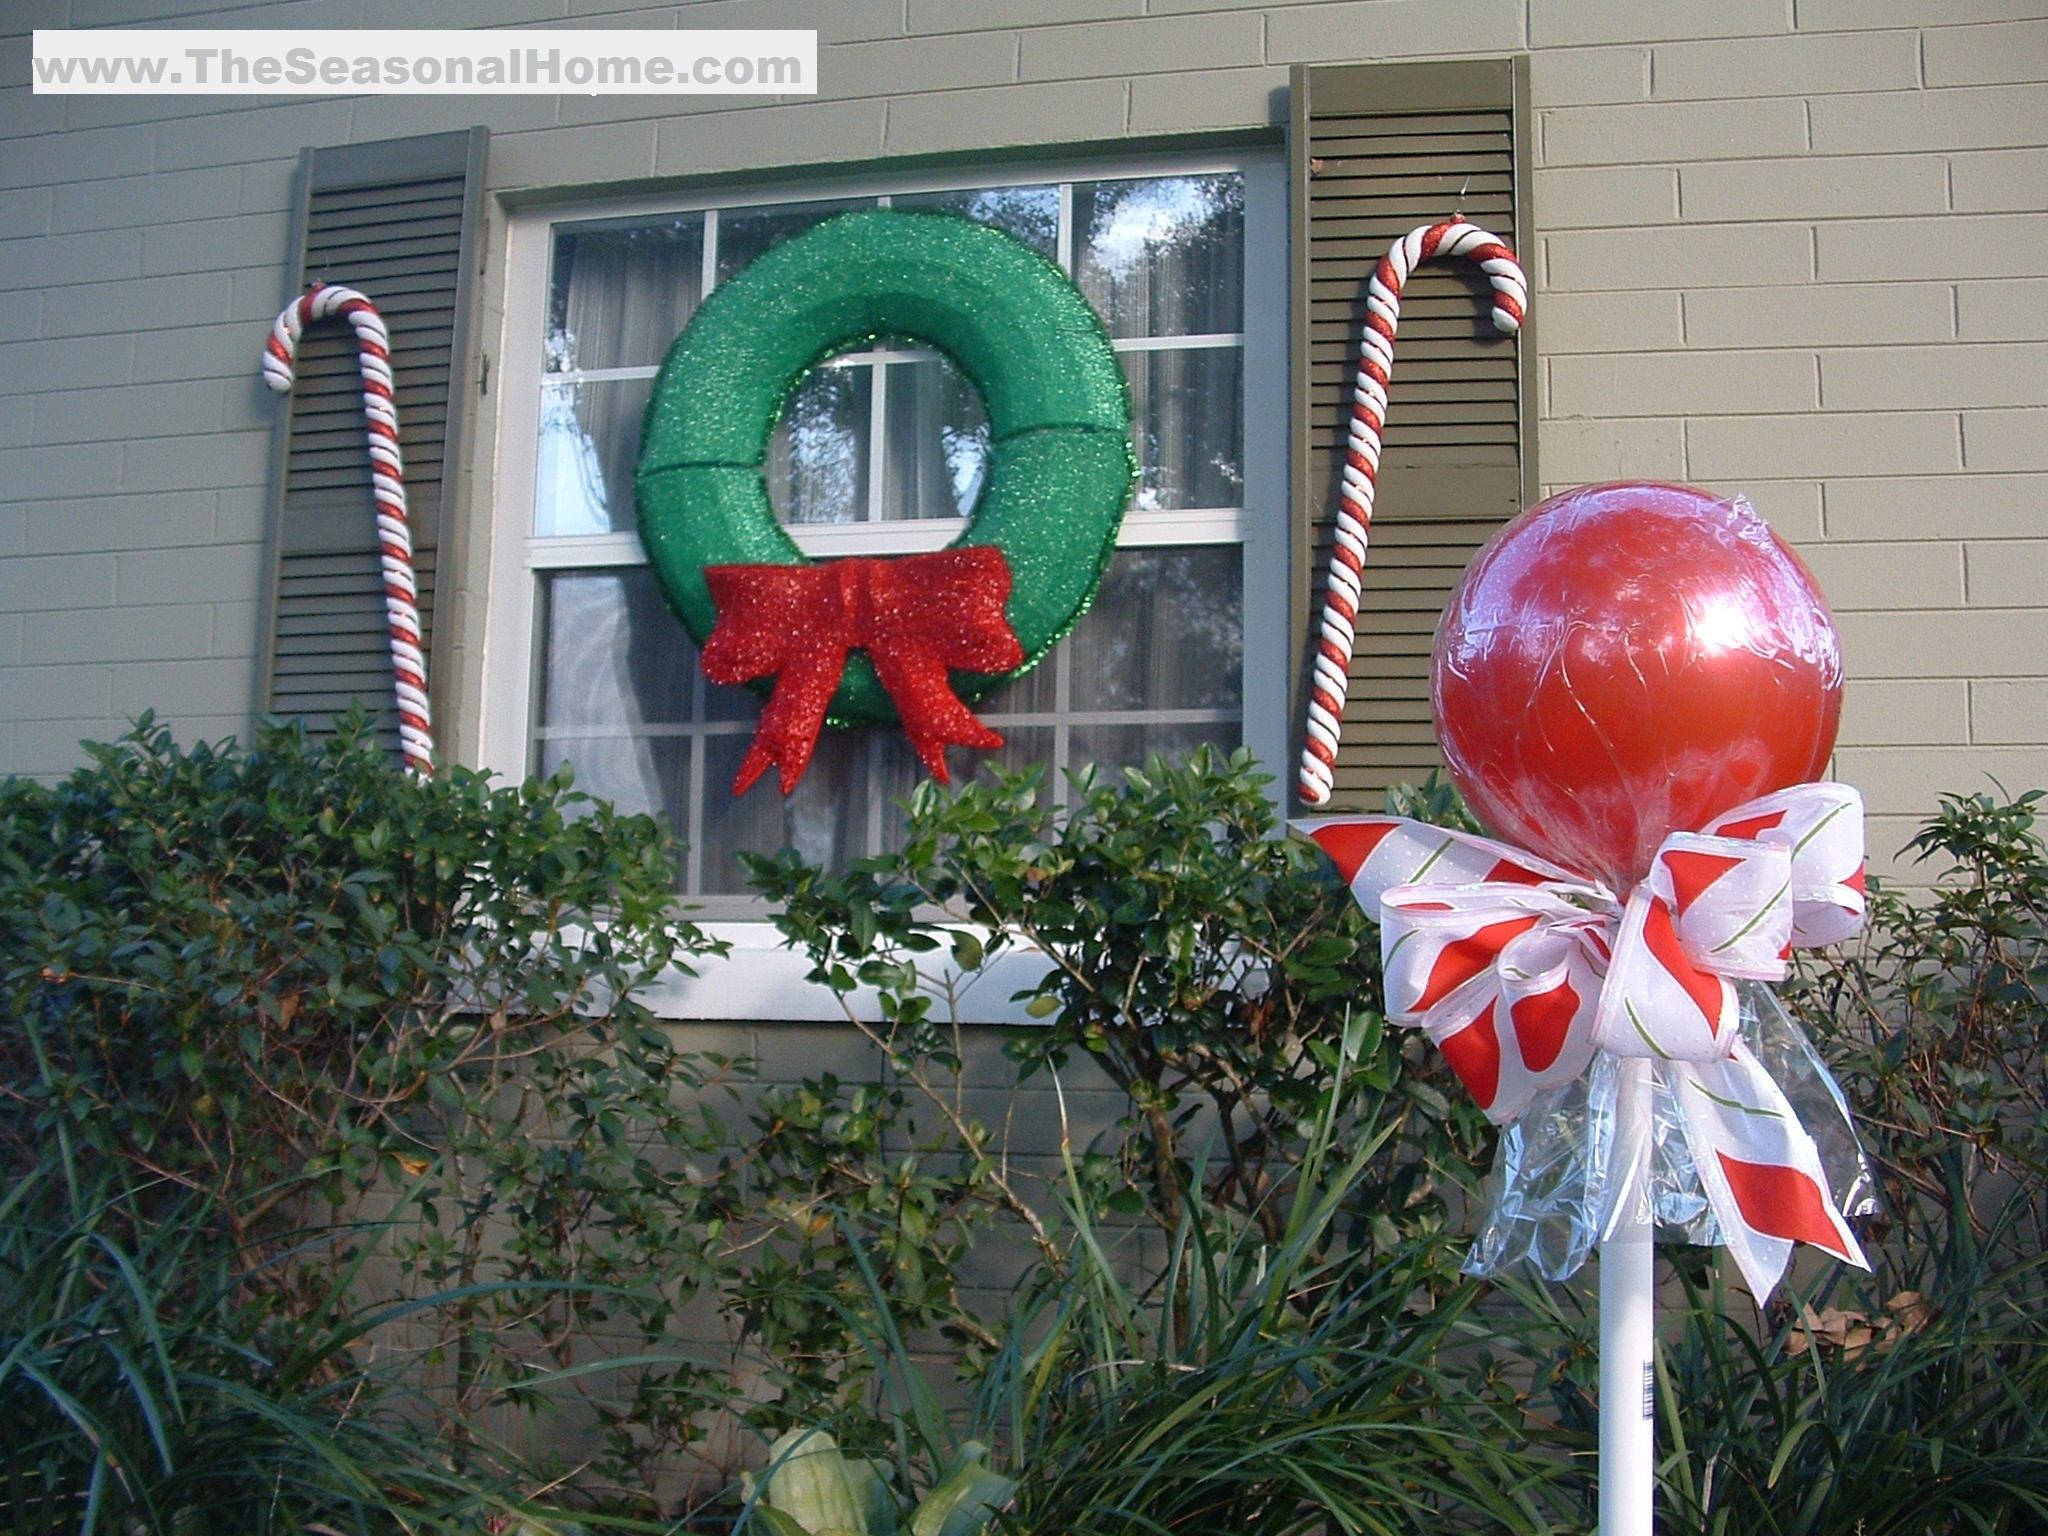 DIY Large Outdoor Christmas Decorations
 Outdoor “CANDY” A Christmas Decorating Idea The